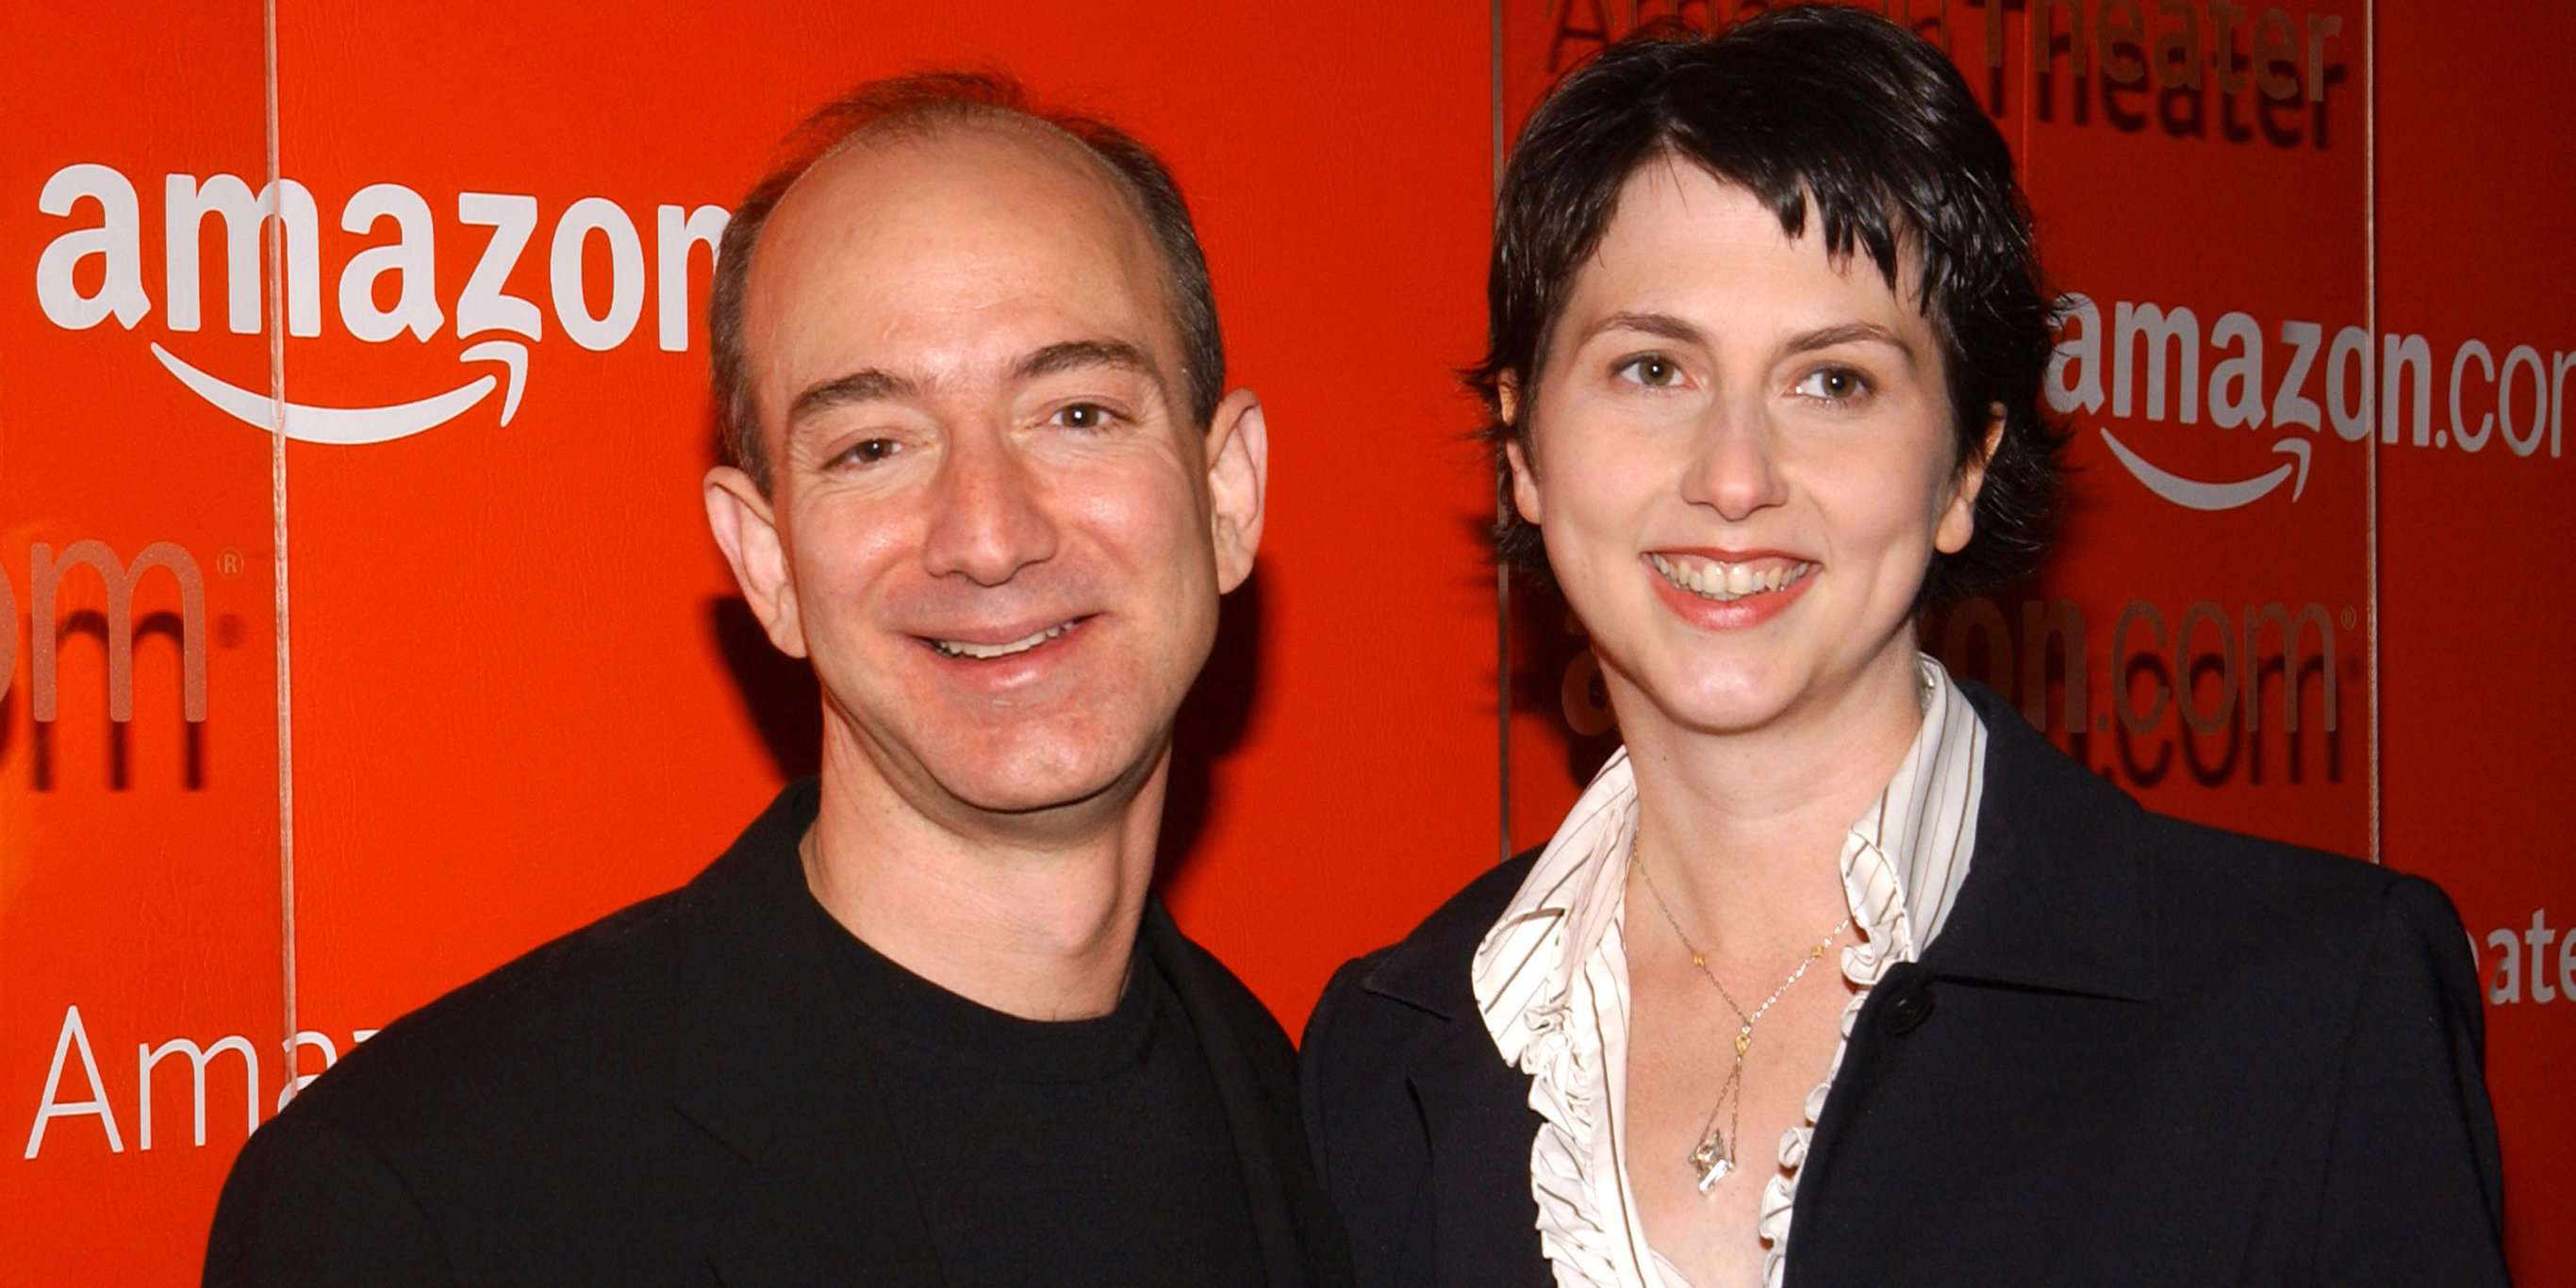 Taboola Ad Example 52446 - MacKenzie Bezos Pledged To Donate More Than Half Of Her Life's Fortune. Here's How She Went From One Of Amazon's First Employees To An Award-winning Novelist.